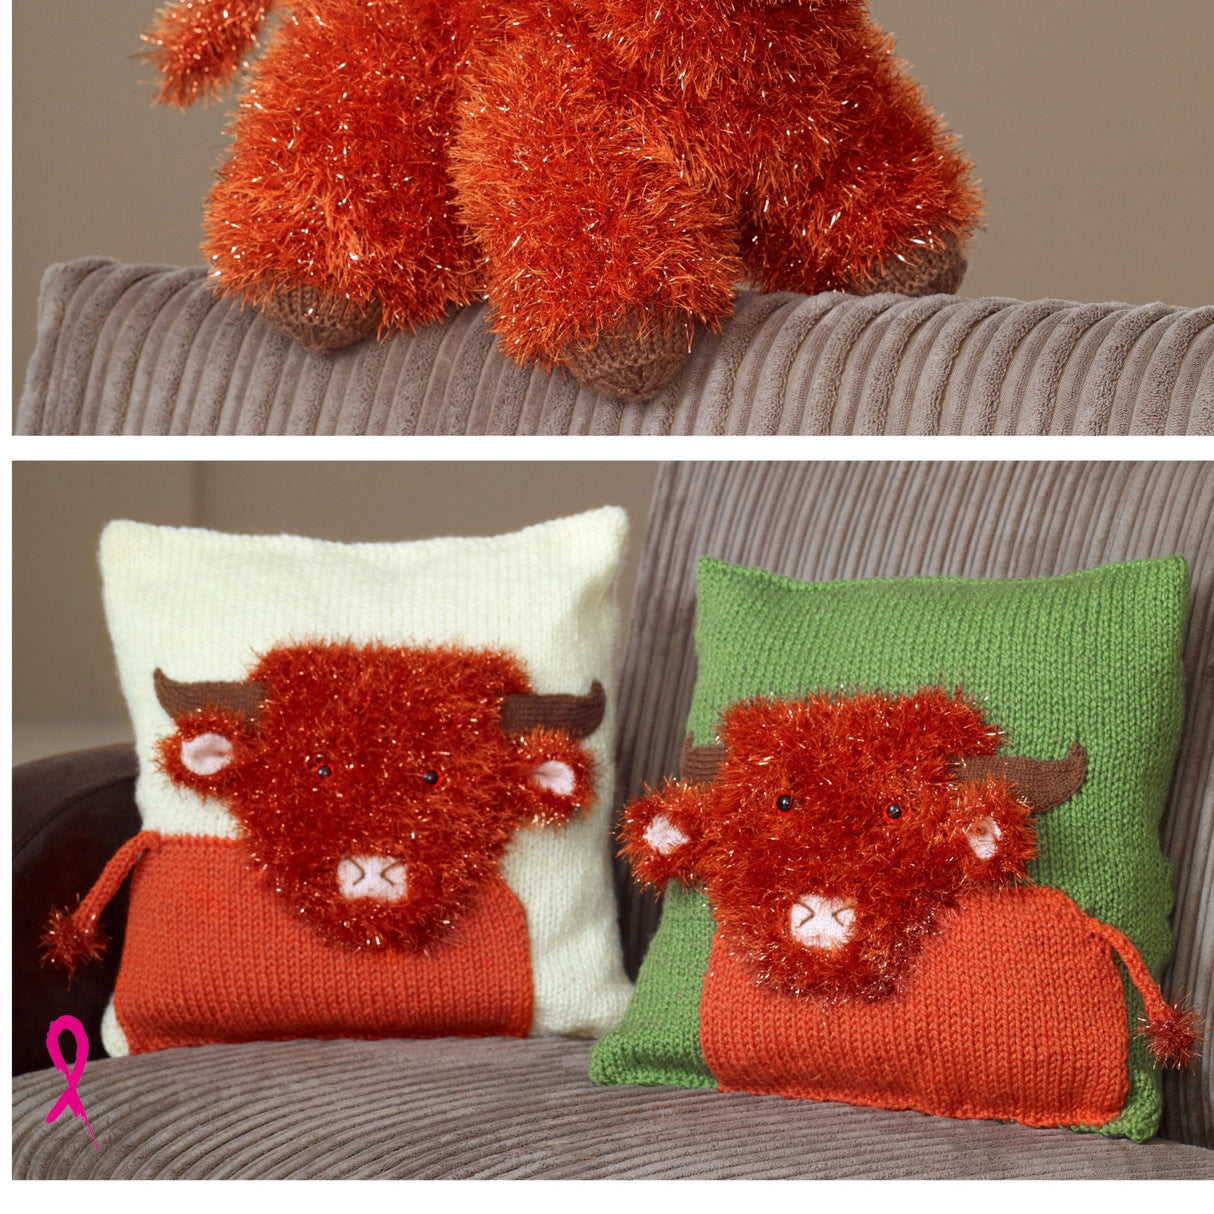 King Cole Highland Cow Cushion Pattern 9089